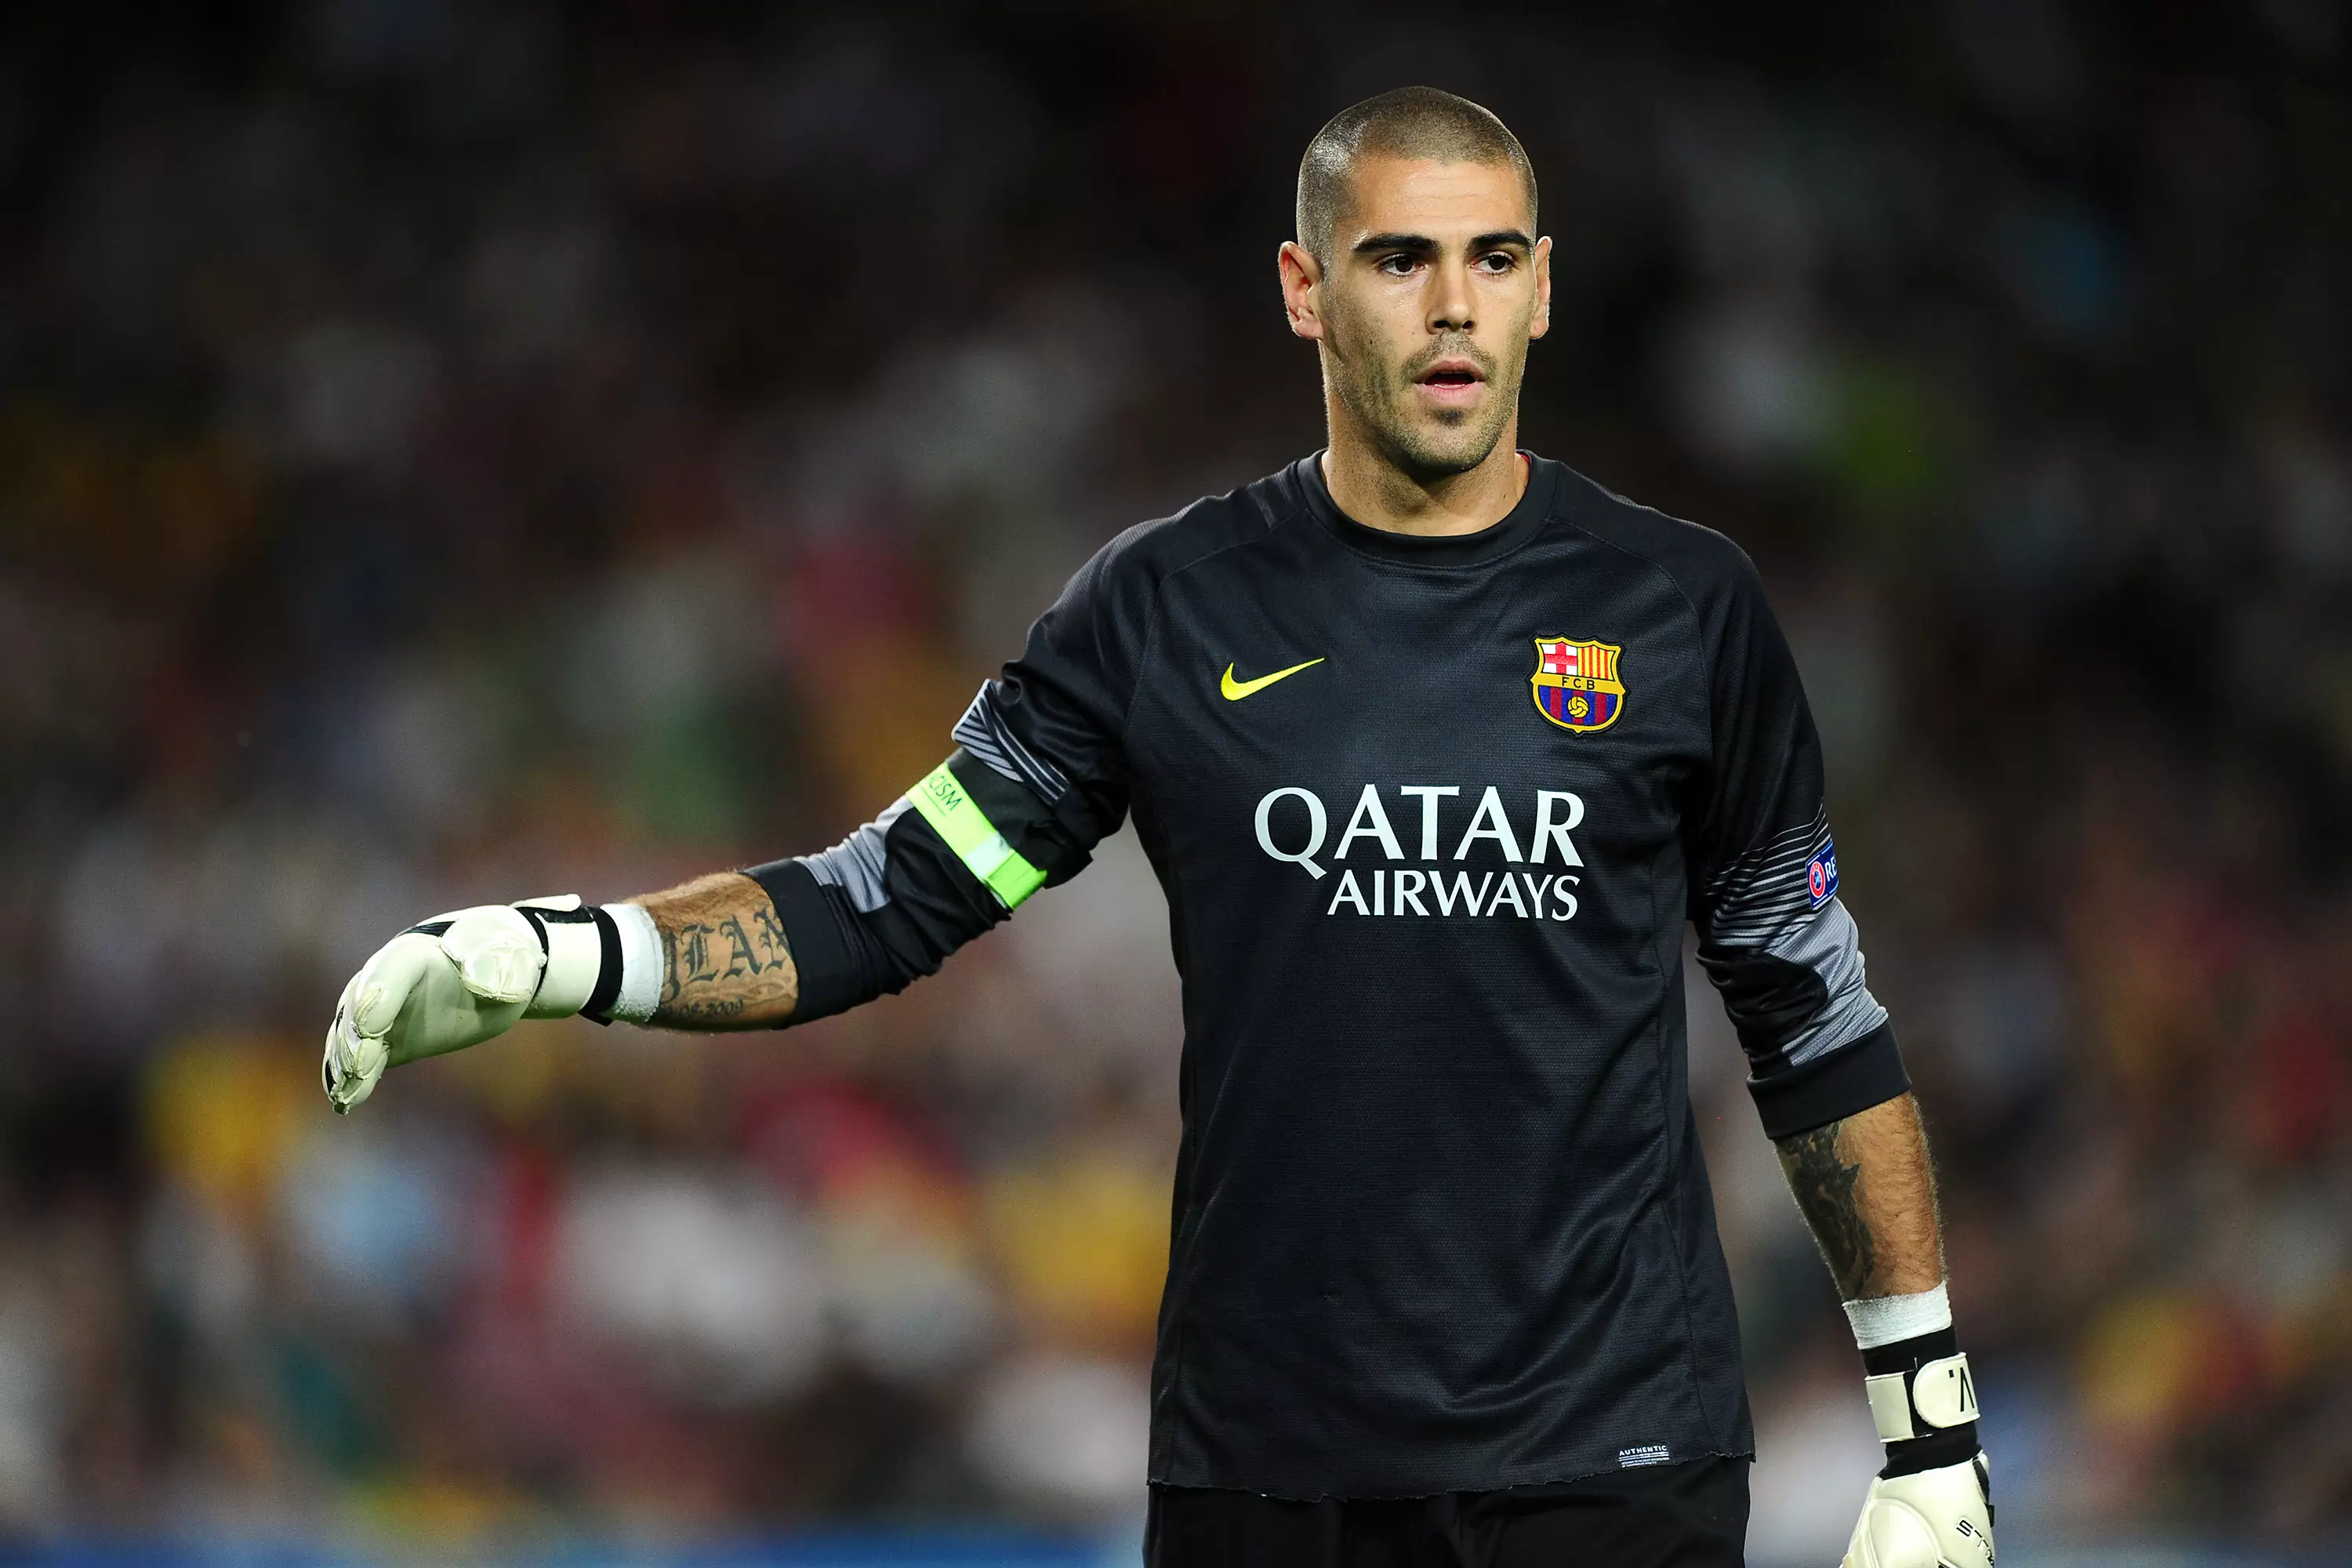 Valdes in his playing days. Image: PA Images